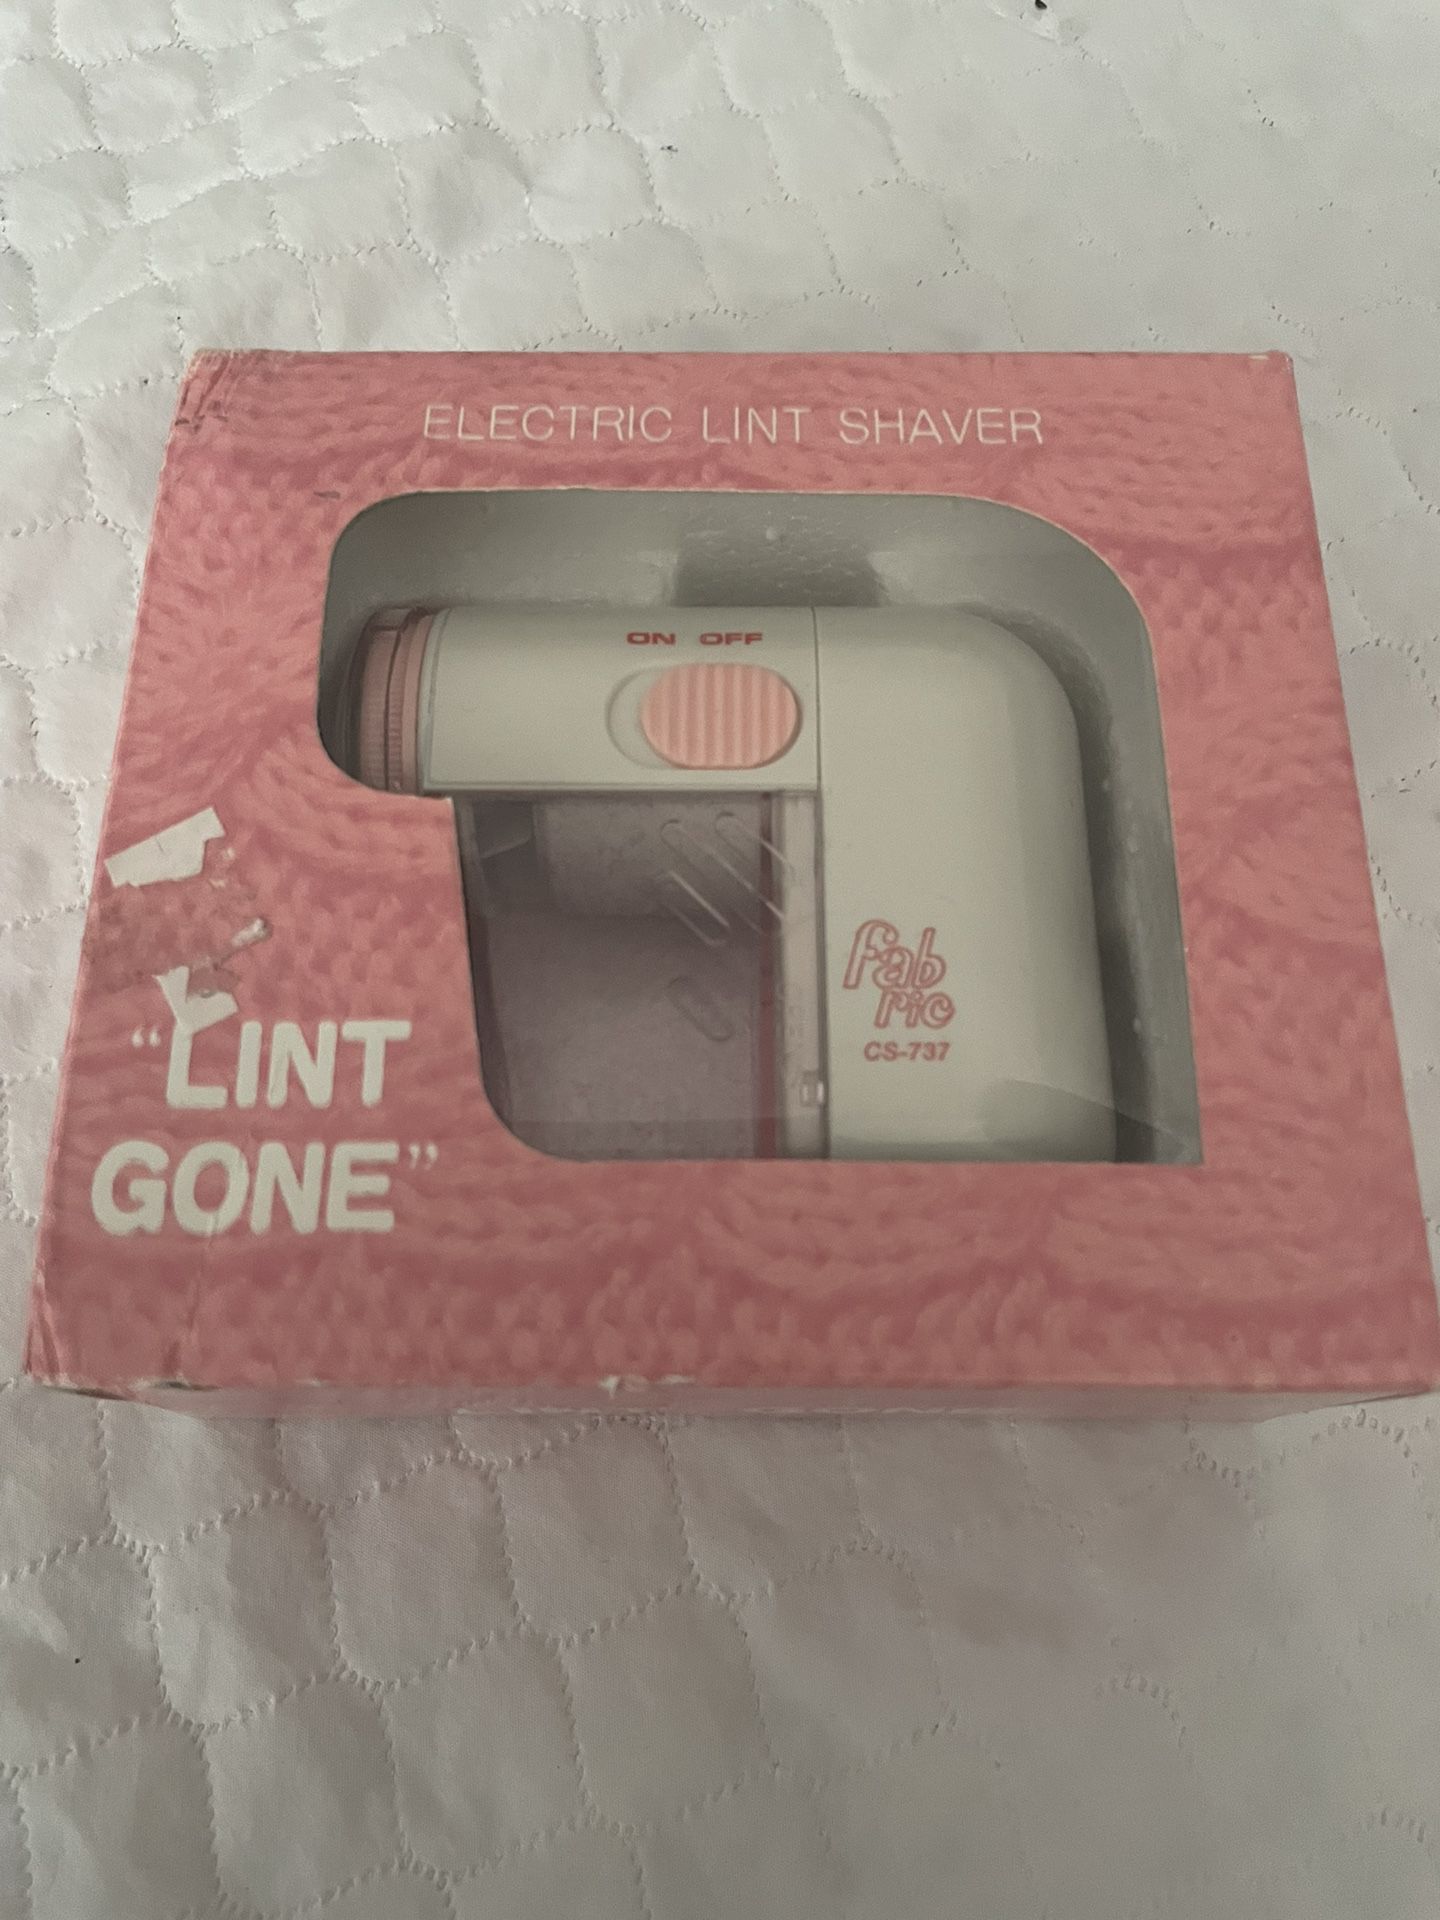 electric lint shaver- lint gone- cs-737- in pink and white